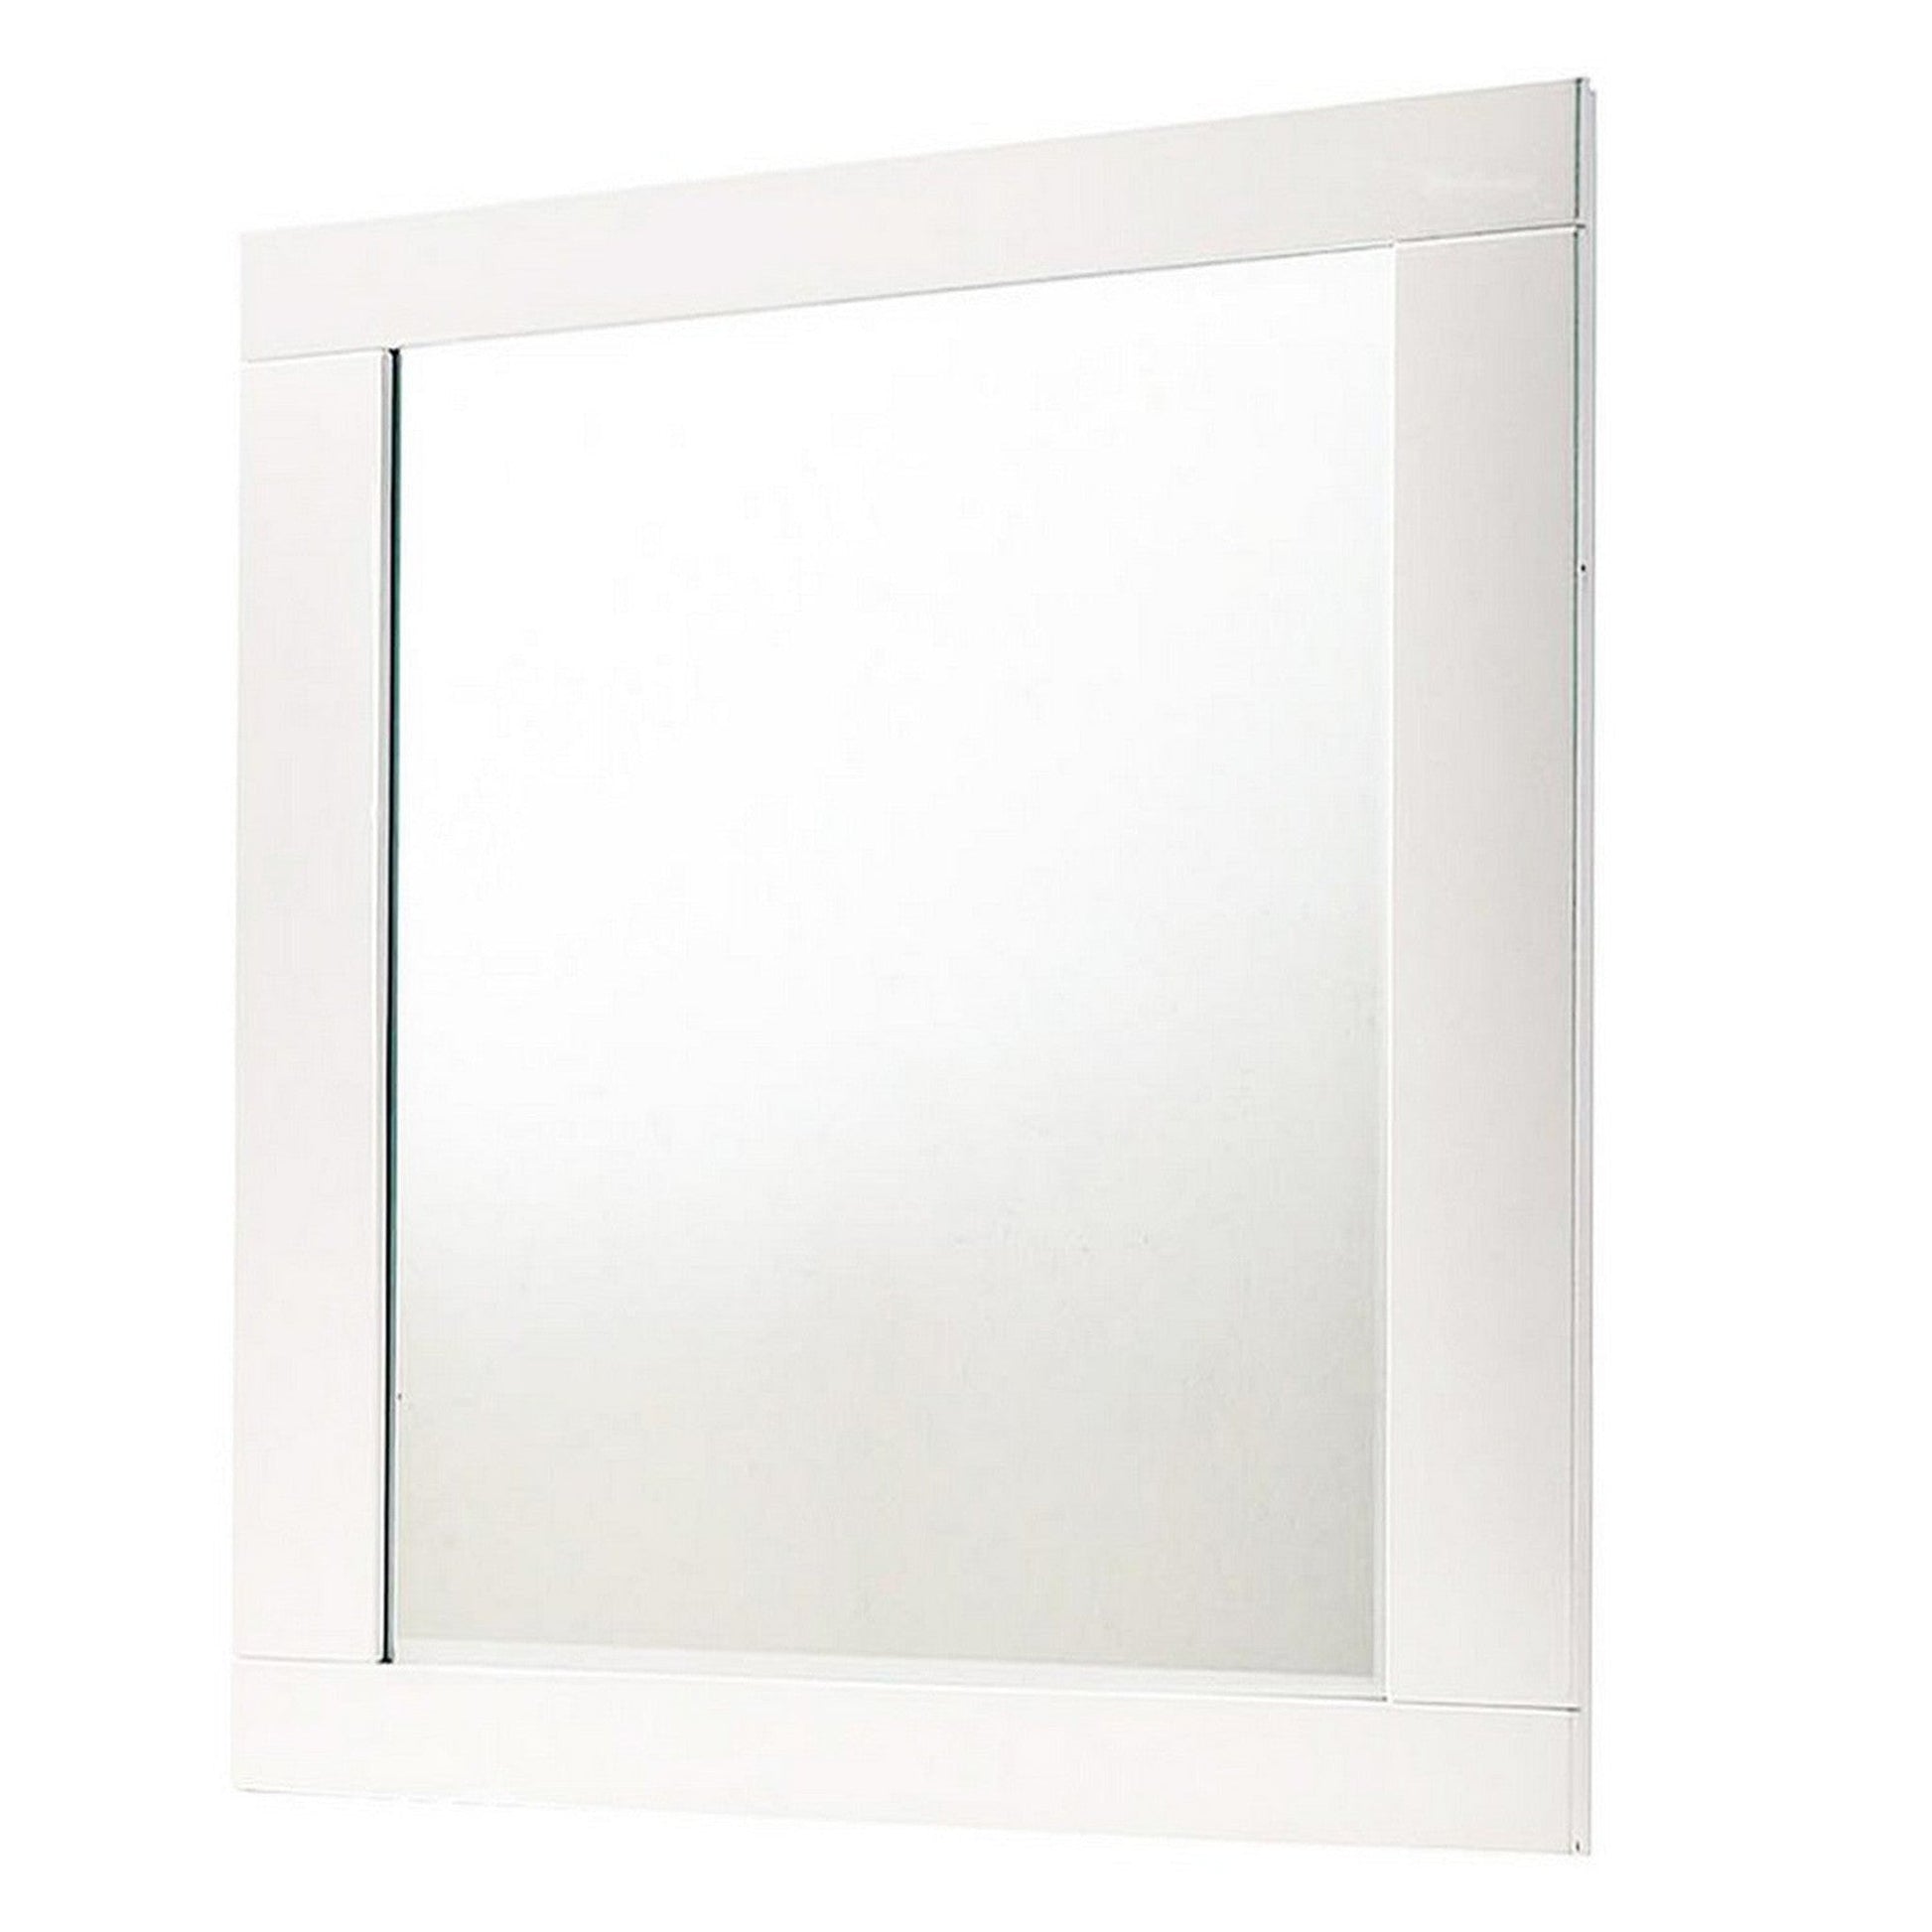 Benzara White Contemporary Square Wooden Mirror With Mounting Hardware